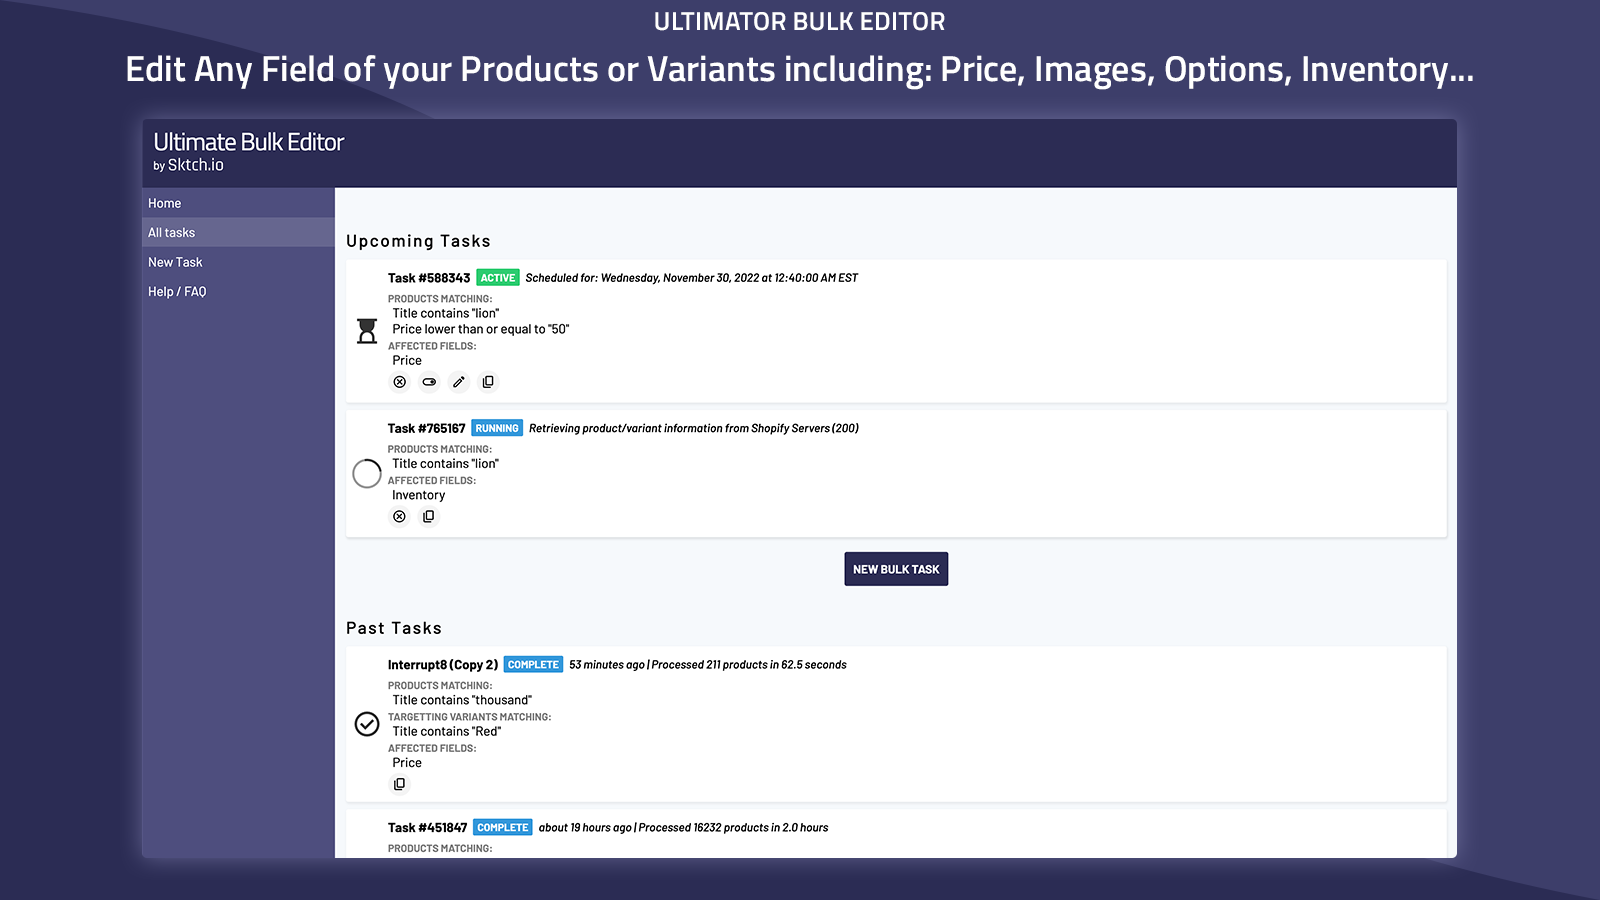 Edit Any Field of your Products or Variants.